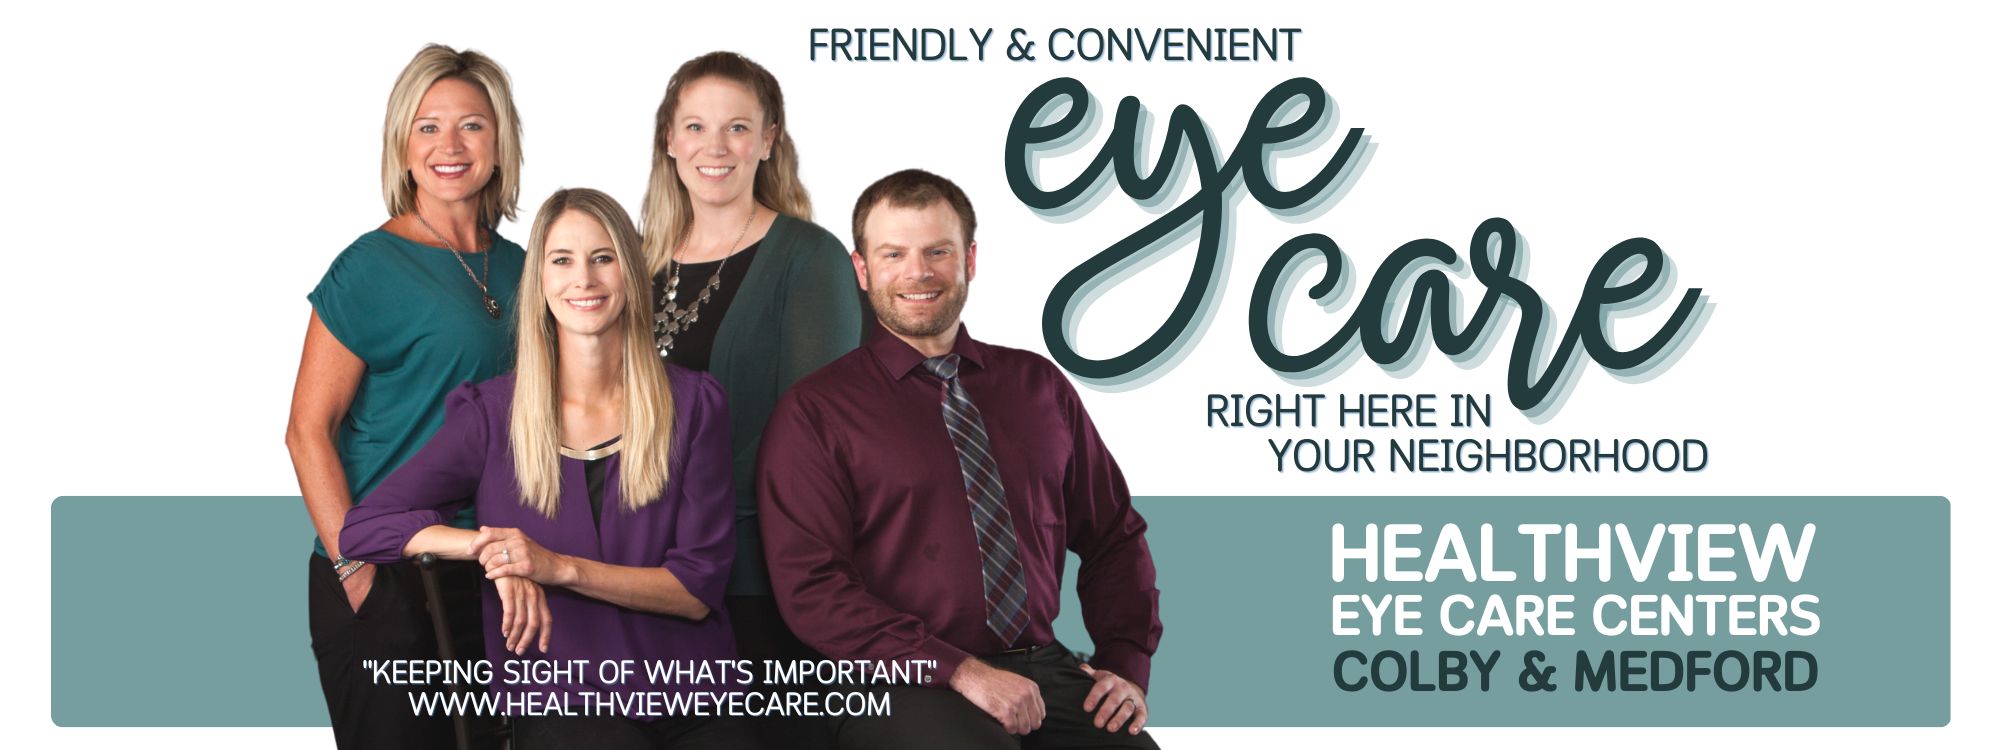 HealthView Eye Care Center 309 E Broadway Ave, Medford Wisconsin 54451